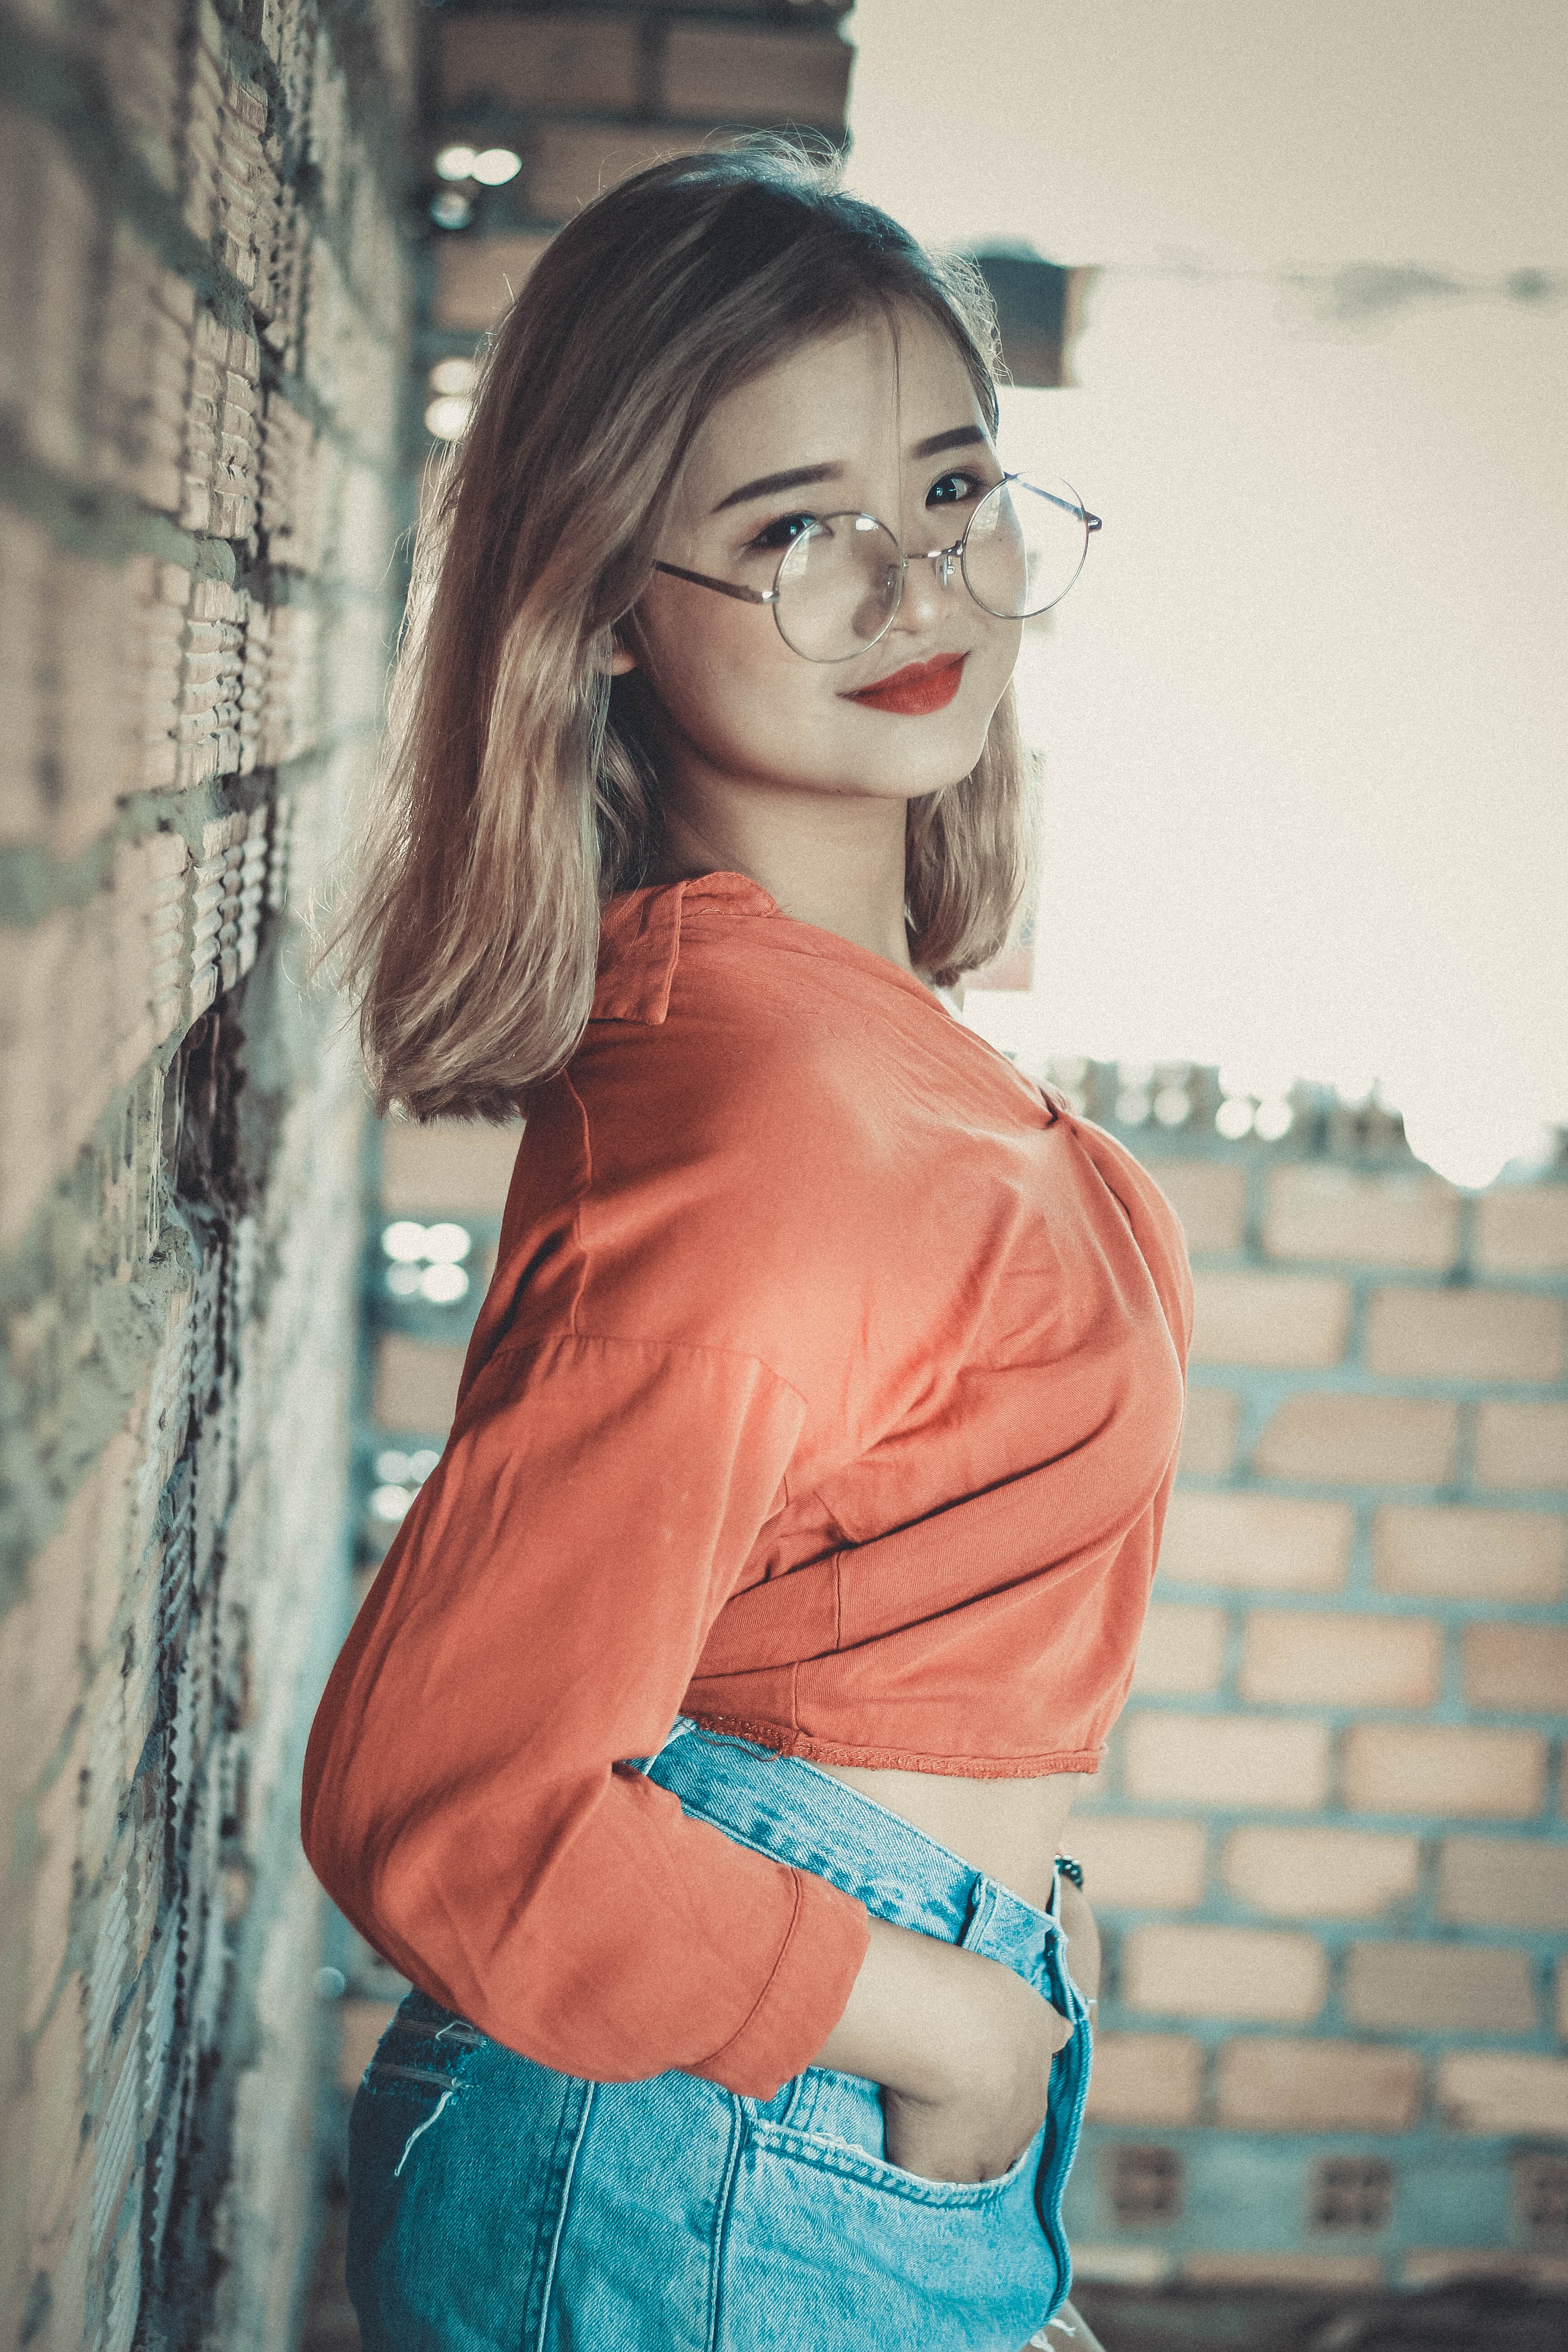 Blonde Haired Woman in Orange Long-sleeved Crop Top Wearing Round Gray Eyeglasses, Lifestyle, Young, Woman, Wear, HQ Photo